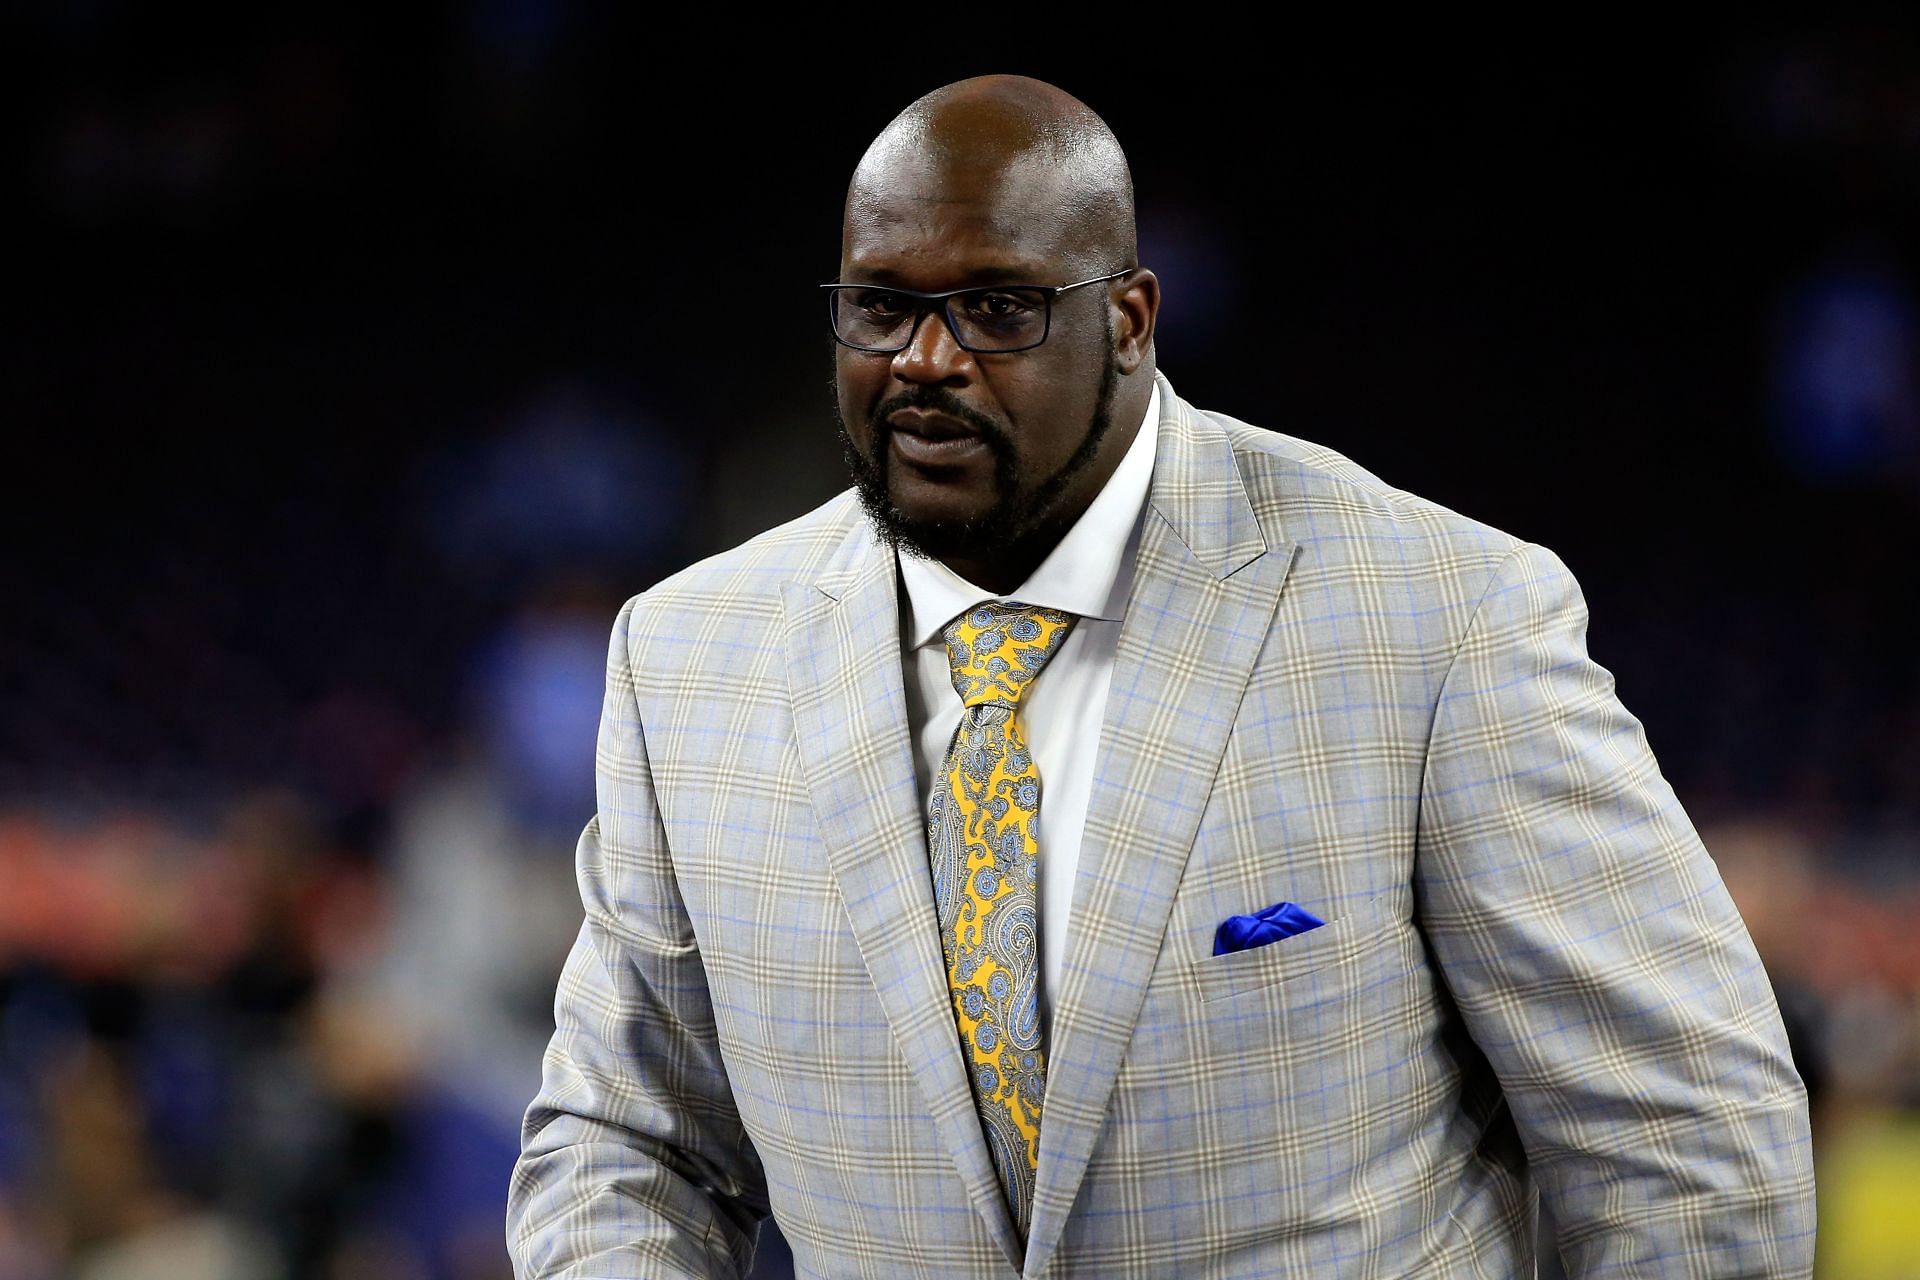 Former NBA player and commentator Shaquille O&#039;Neal looks on prior to the 2016 NCAA Men&#039;s Final Four National Championship game between the Villanova Wildcats and the North Carolina Tar Heels at NRG Stadium on April 4, 2016 in Houston, Texas